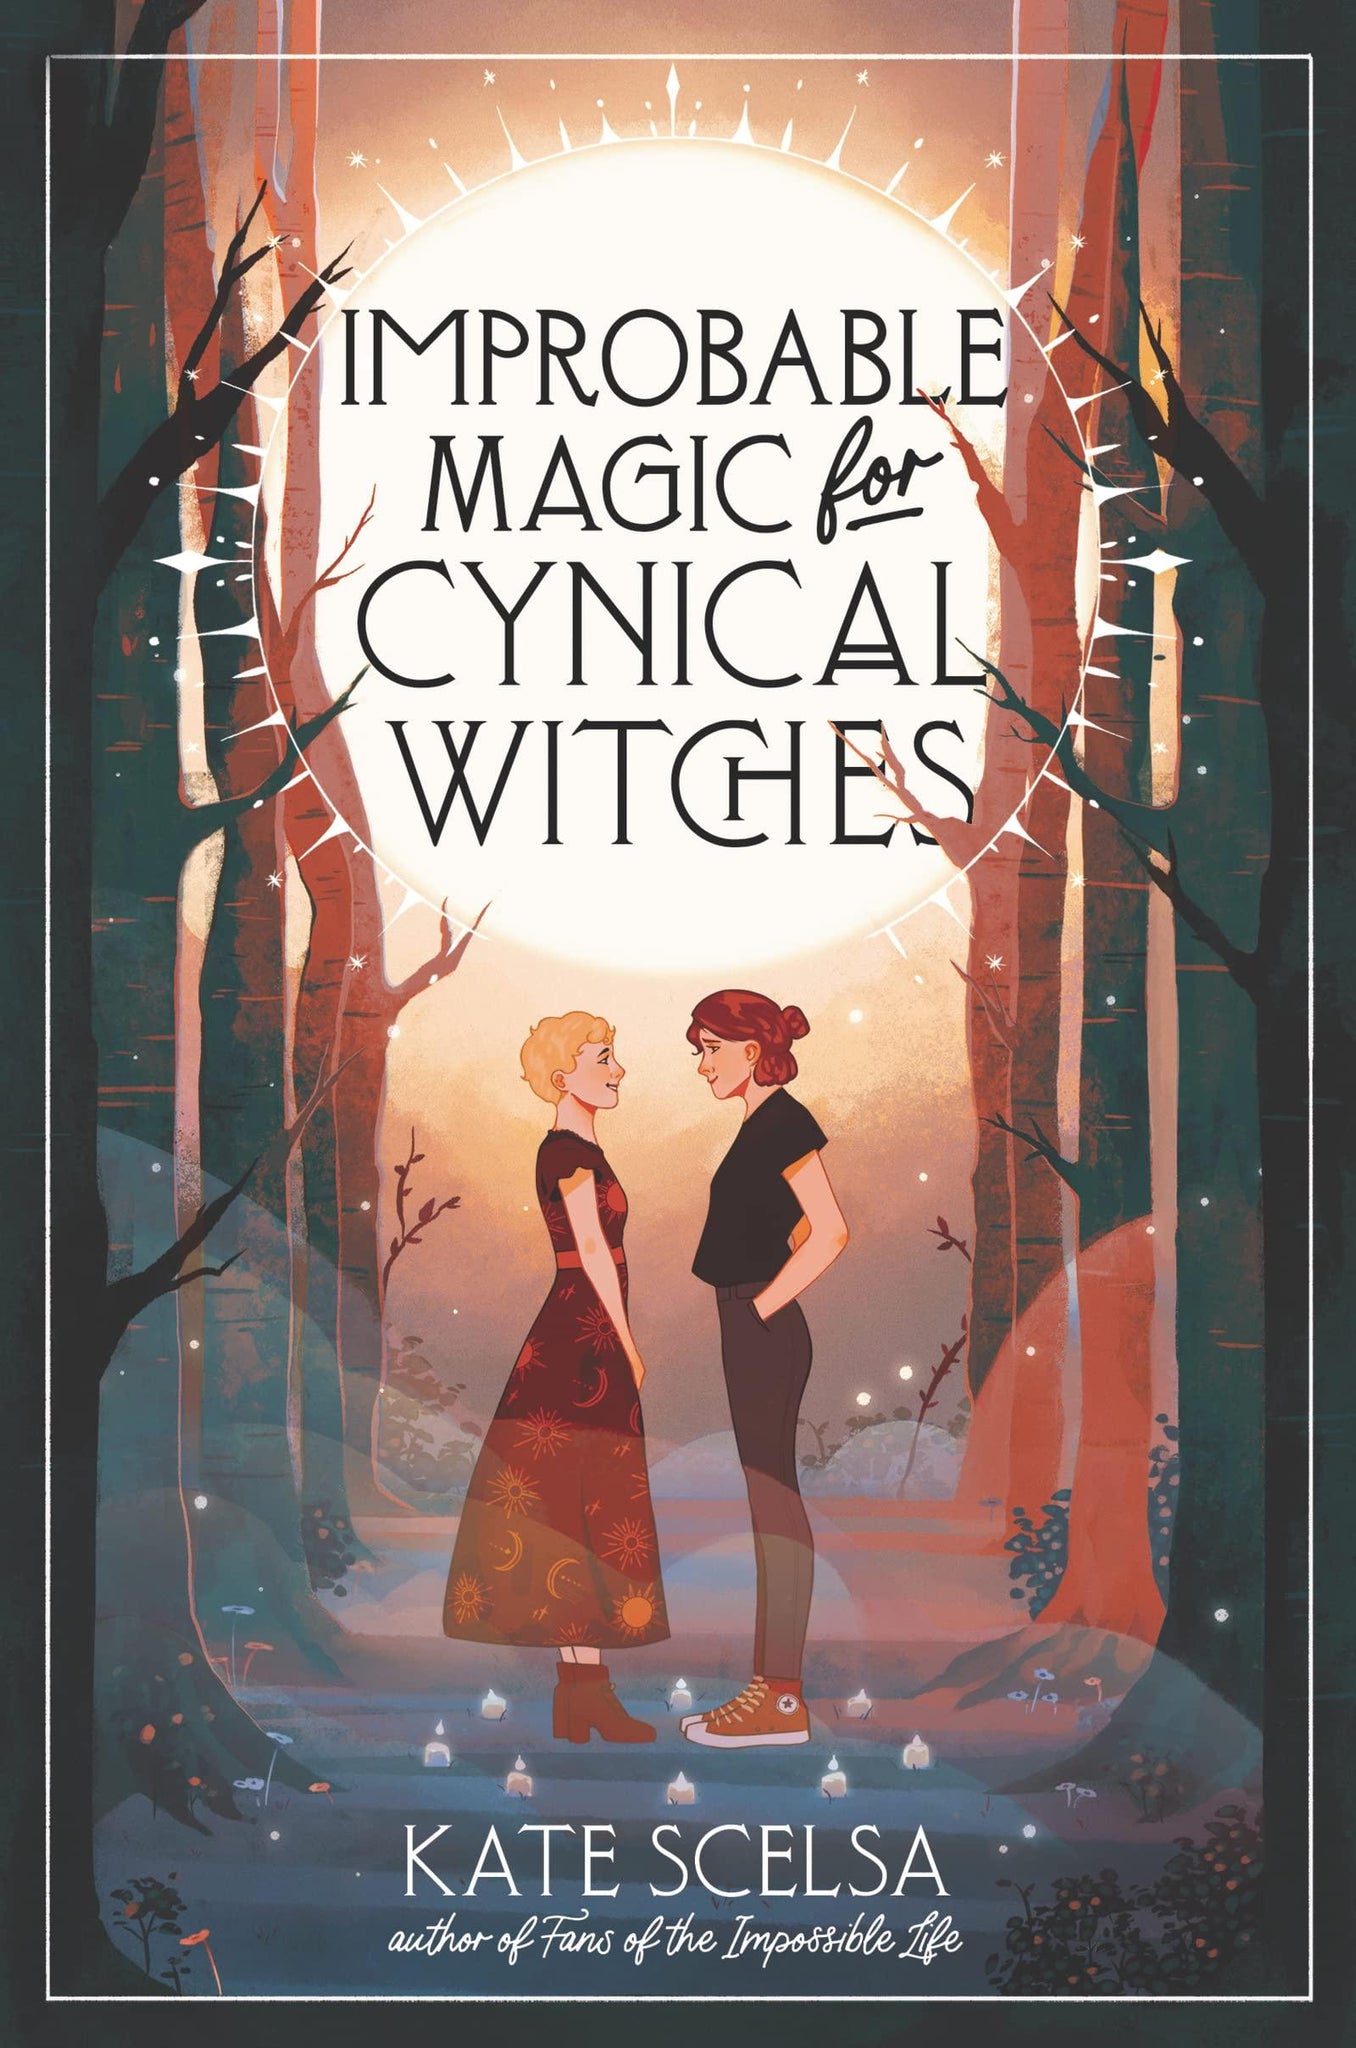 Improbable Magic for Cynical Witches - ShopQueer.co